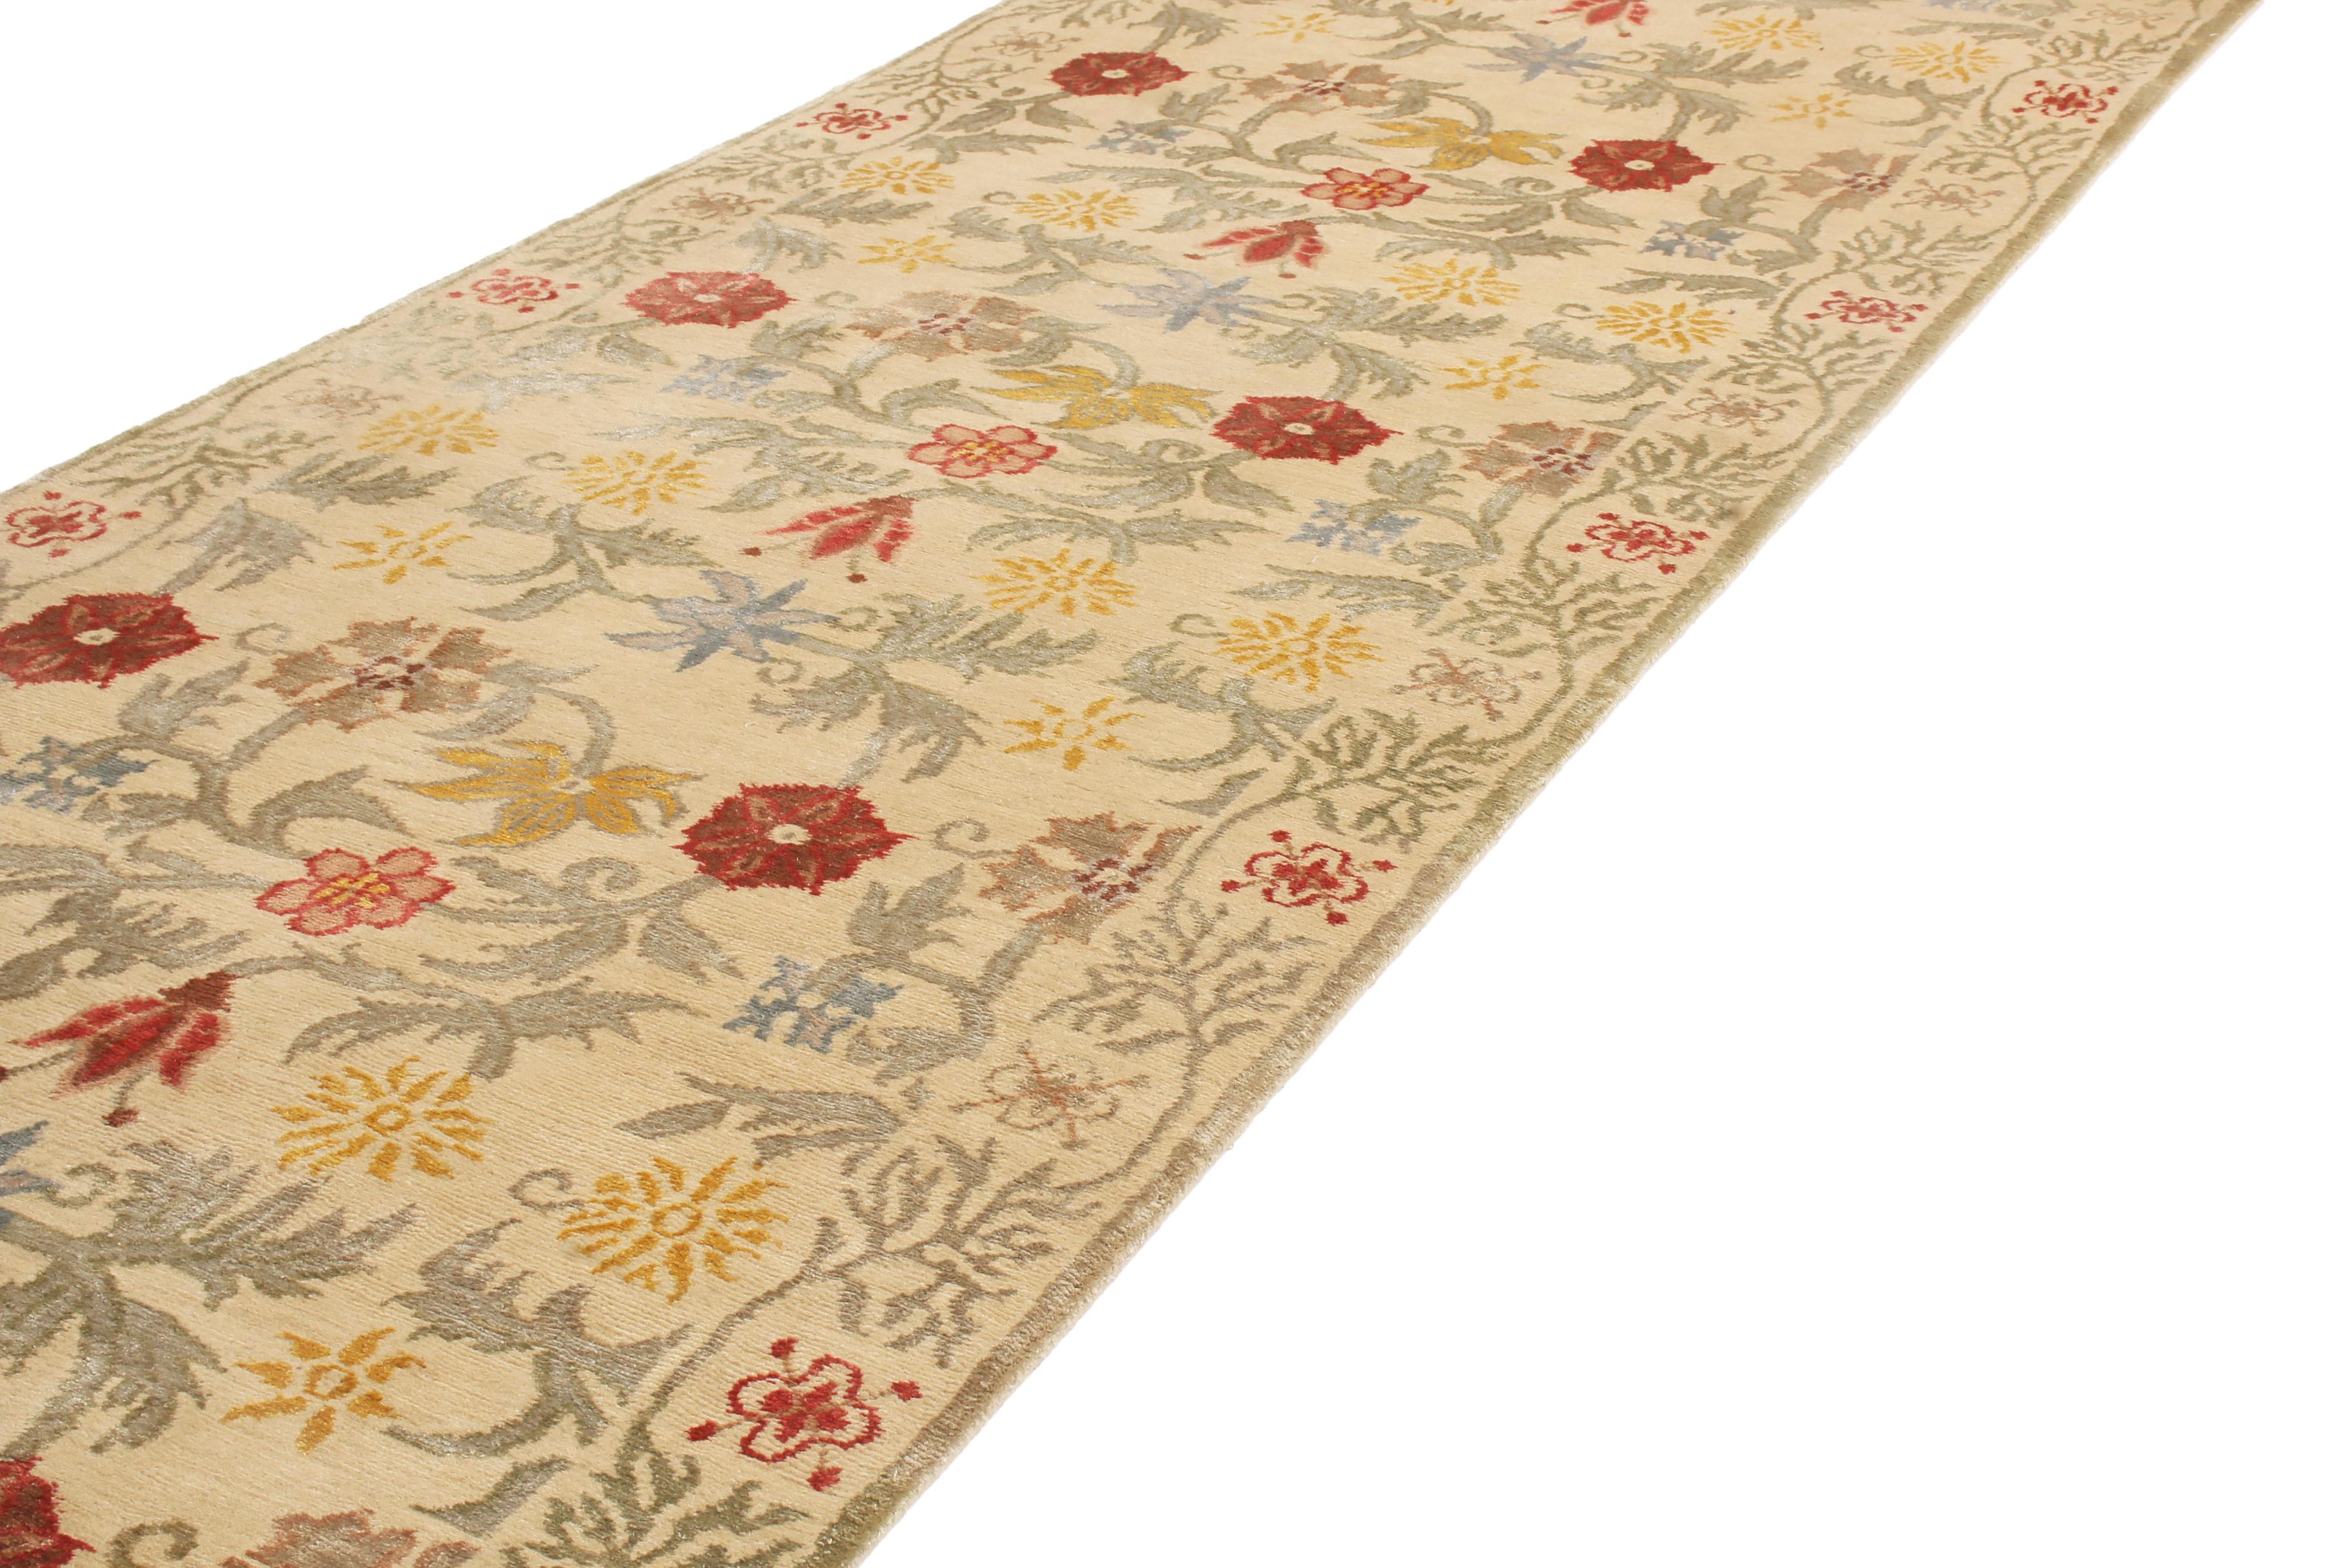 Hand-knotted in Nepal, this floral runner features a Bilbao floral design, hand-knotted in a lustrous combination of wool and silk. Named for the Spanish city fathering its ancestral patterns, the repetition of the all-over rose, tulip, and palmette